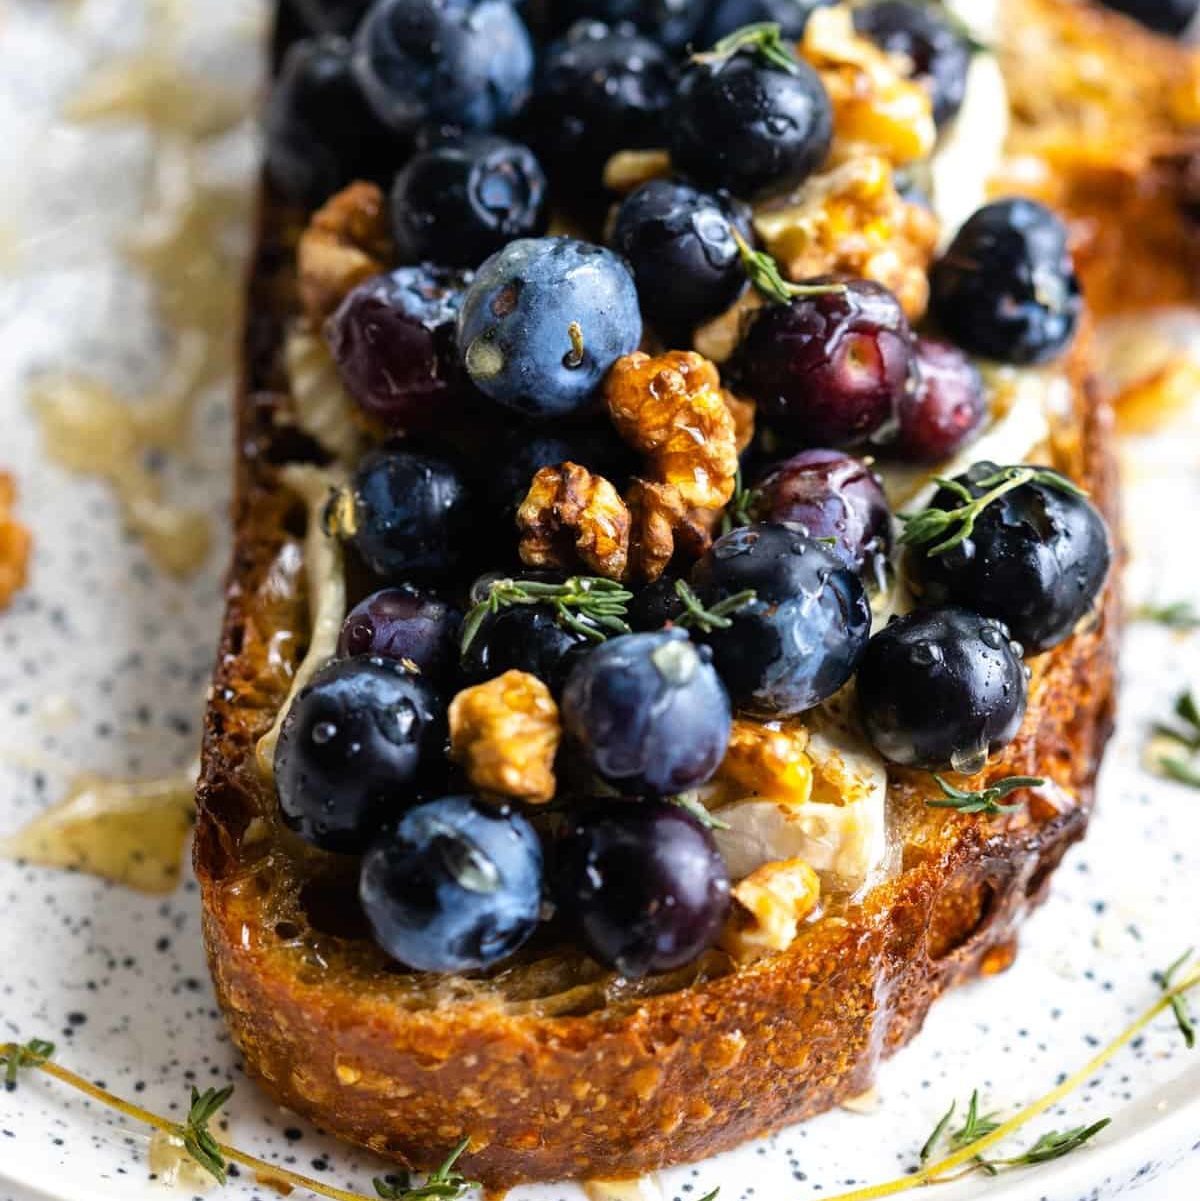 Blueberry Brie Walnut Toast – Becky Sue, of Baking The Goods